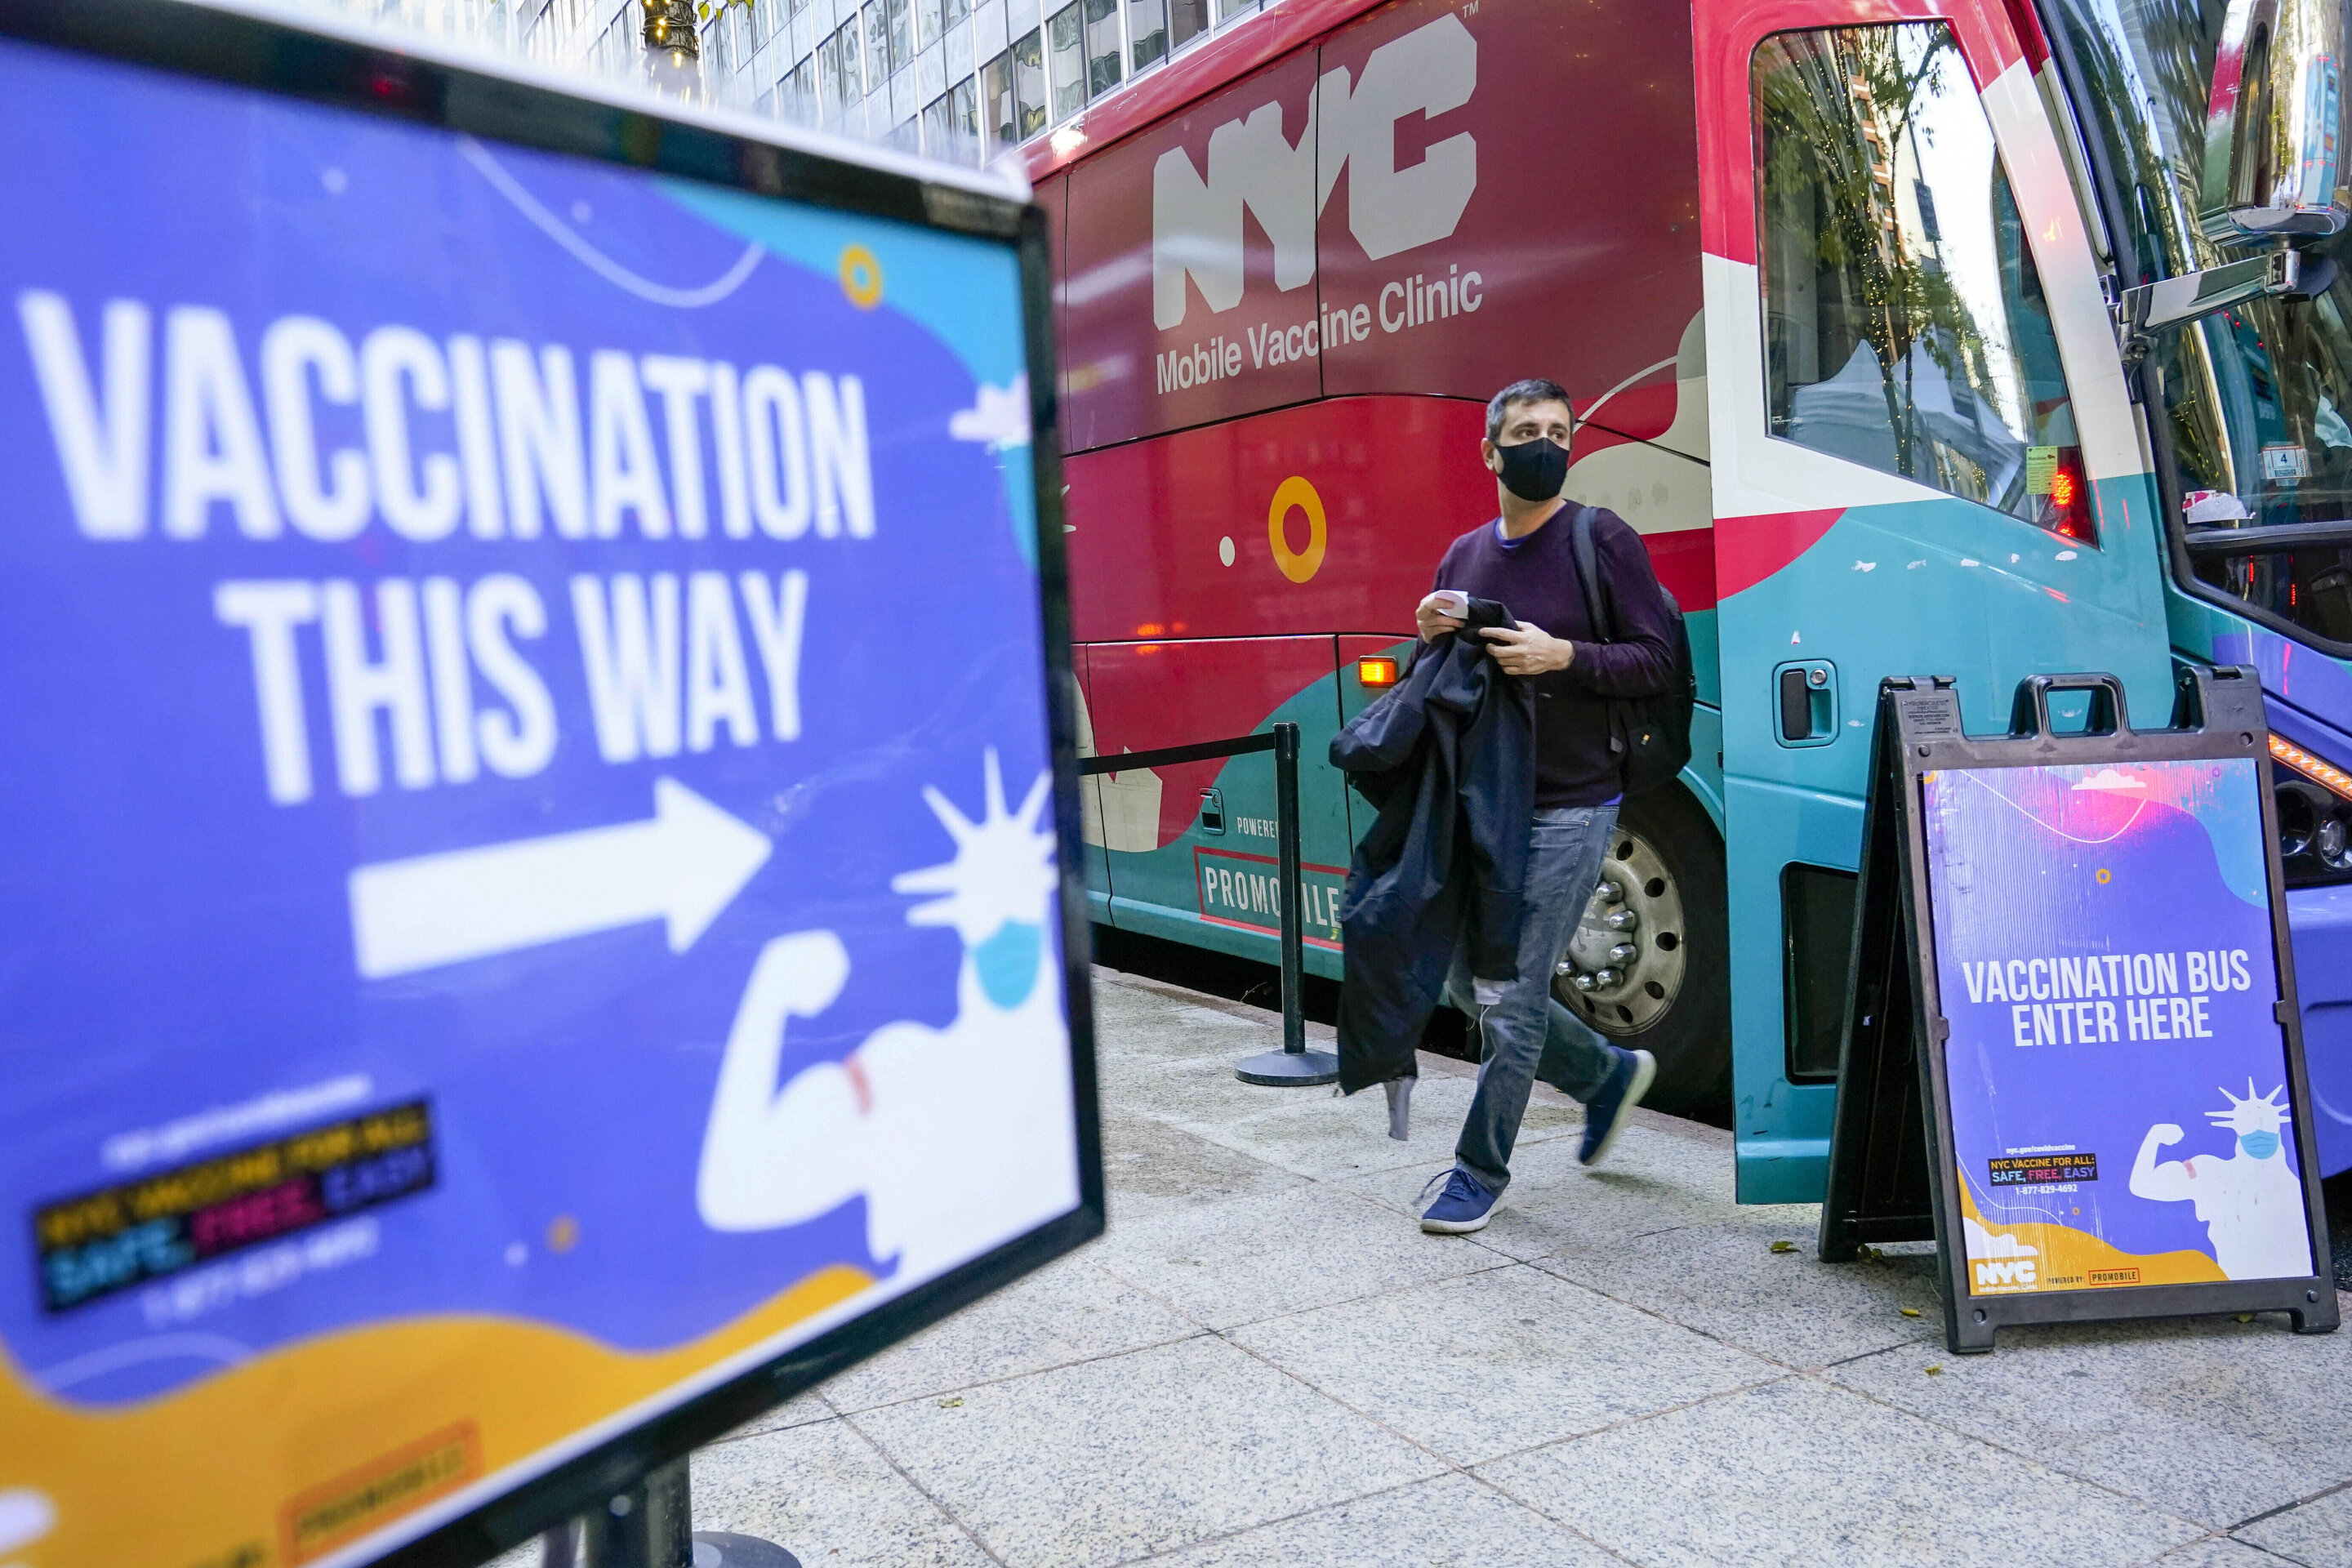 #NYC ending COVID-19 vaccination mandate for city employees